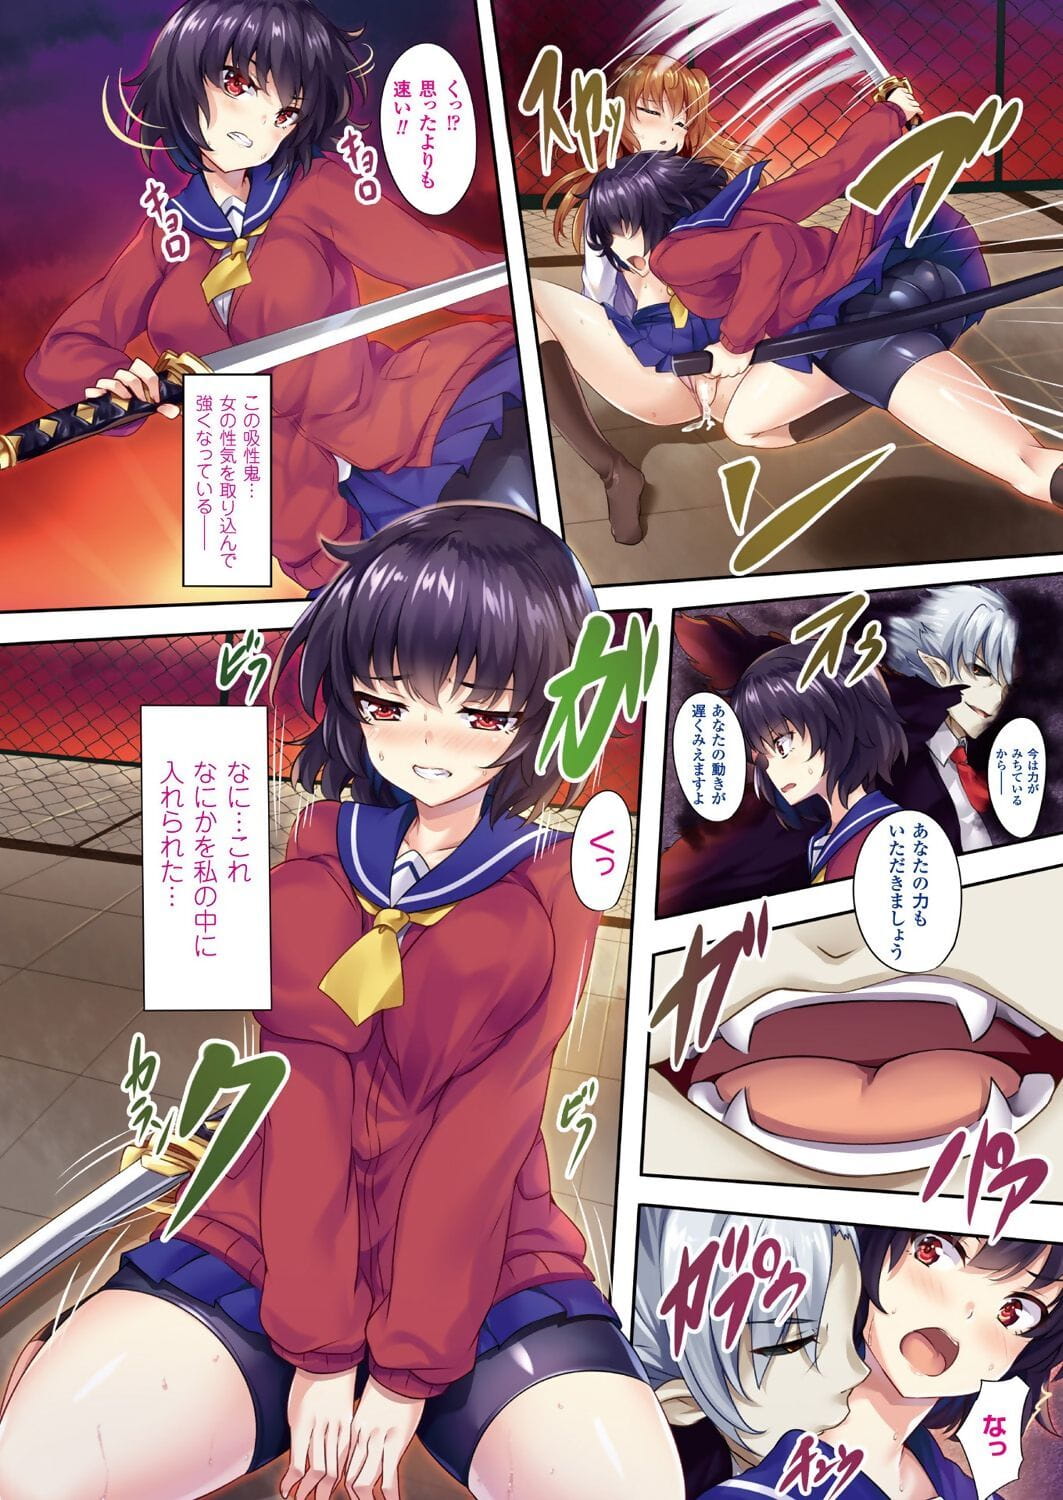 Bessatsu Comic Unreal Color Comic Collection 7 side_R - part 2 page 1